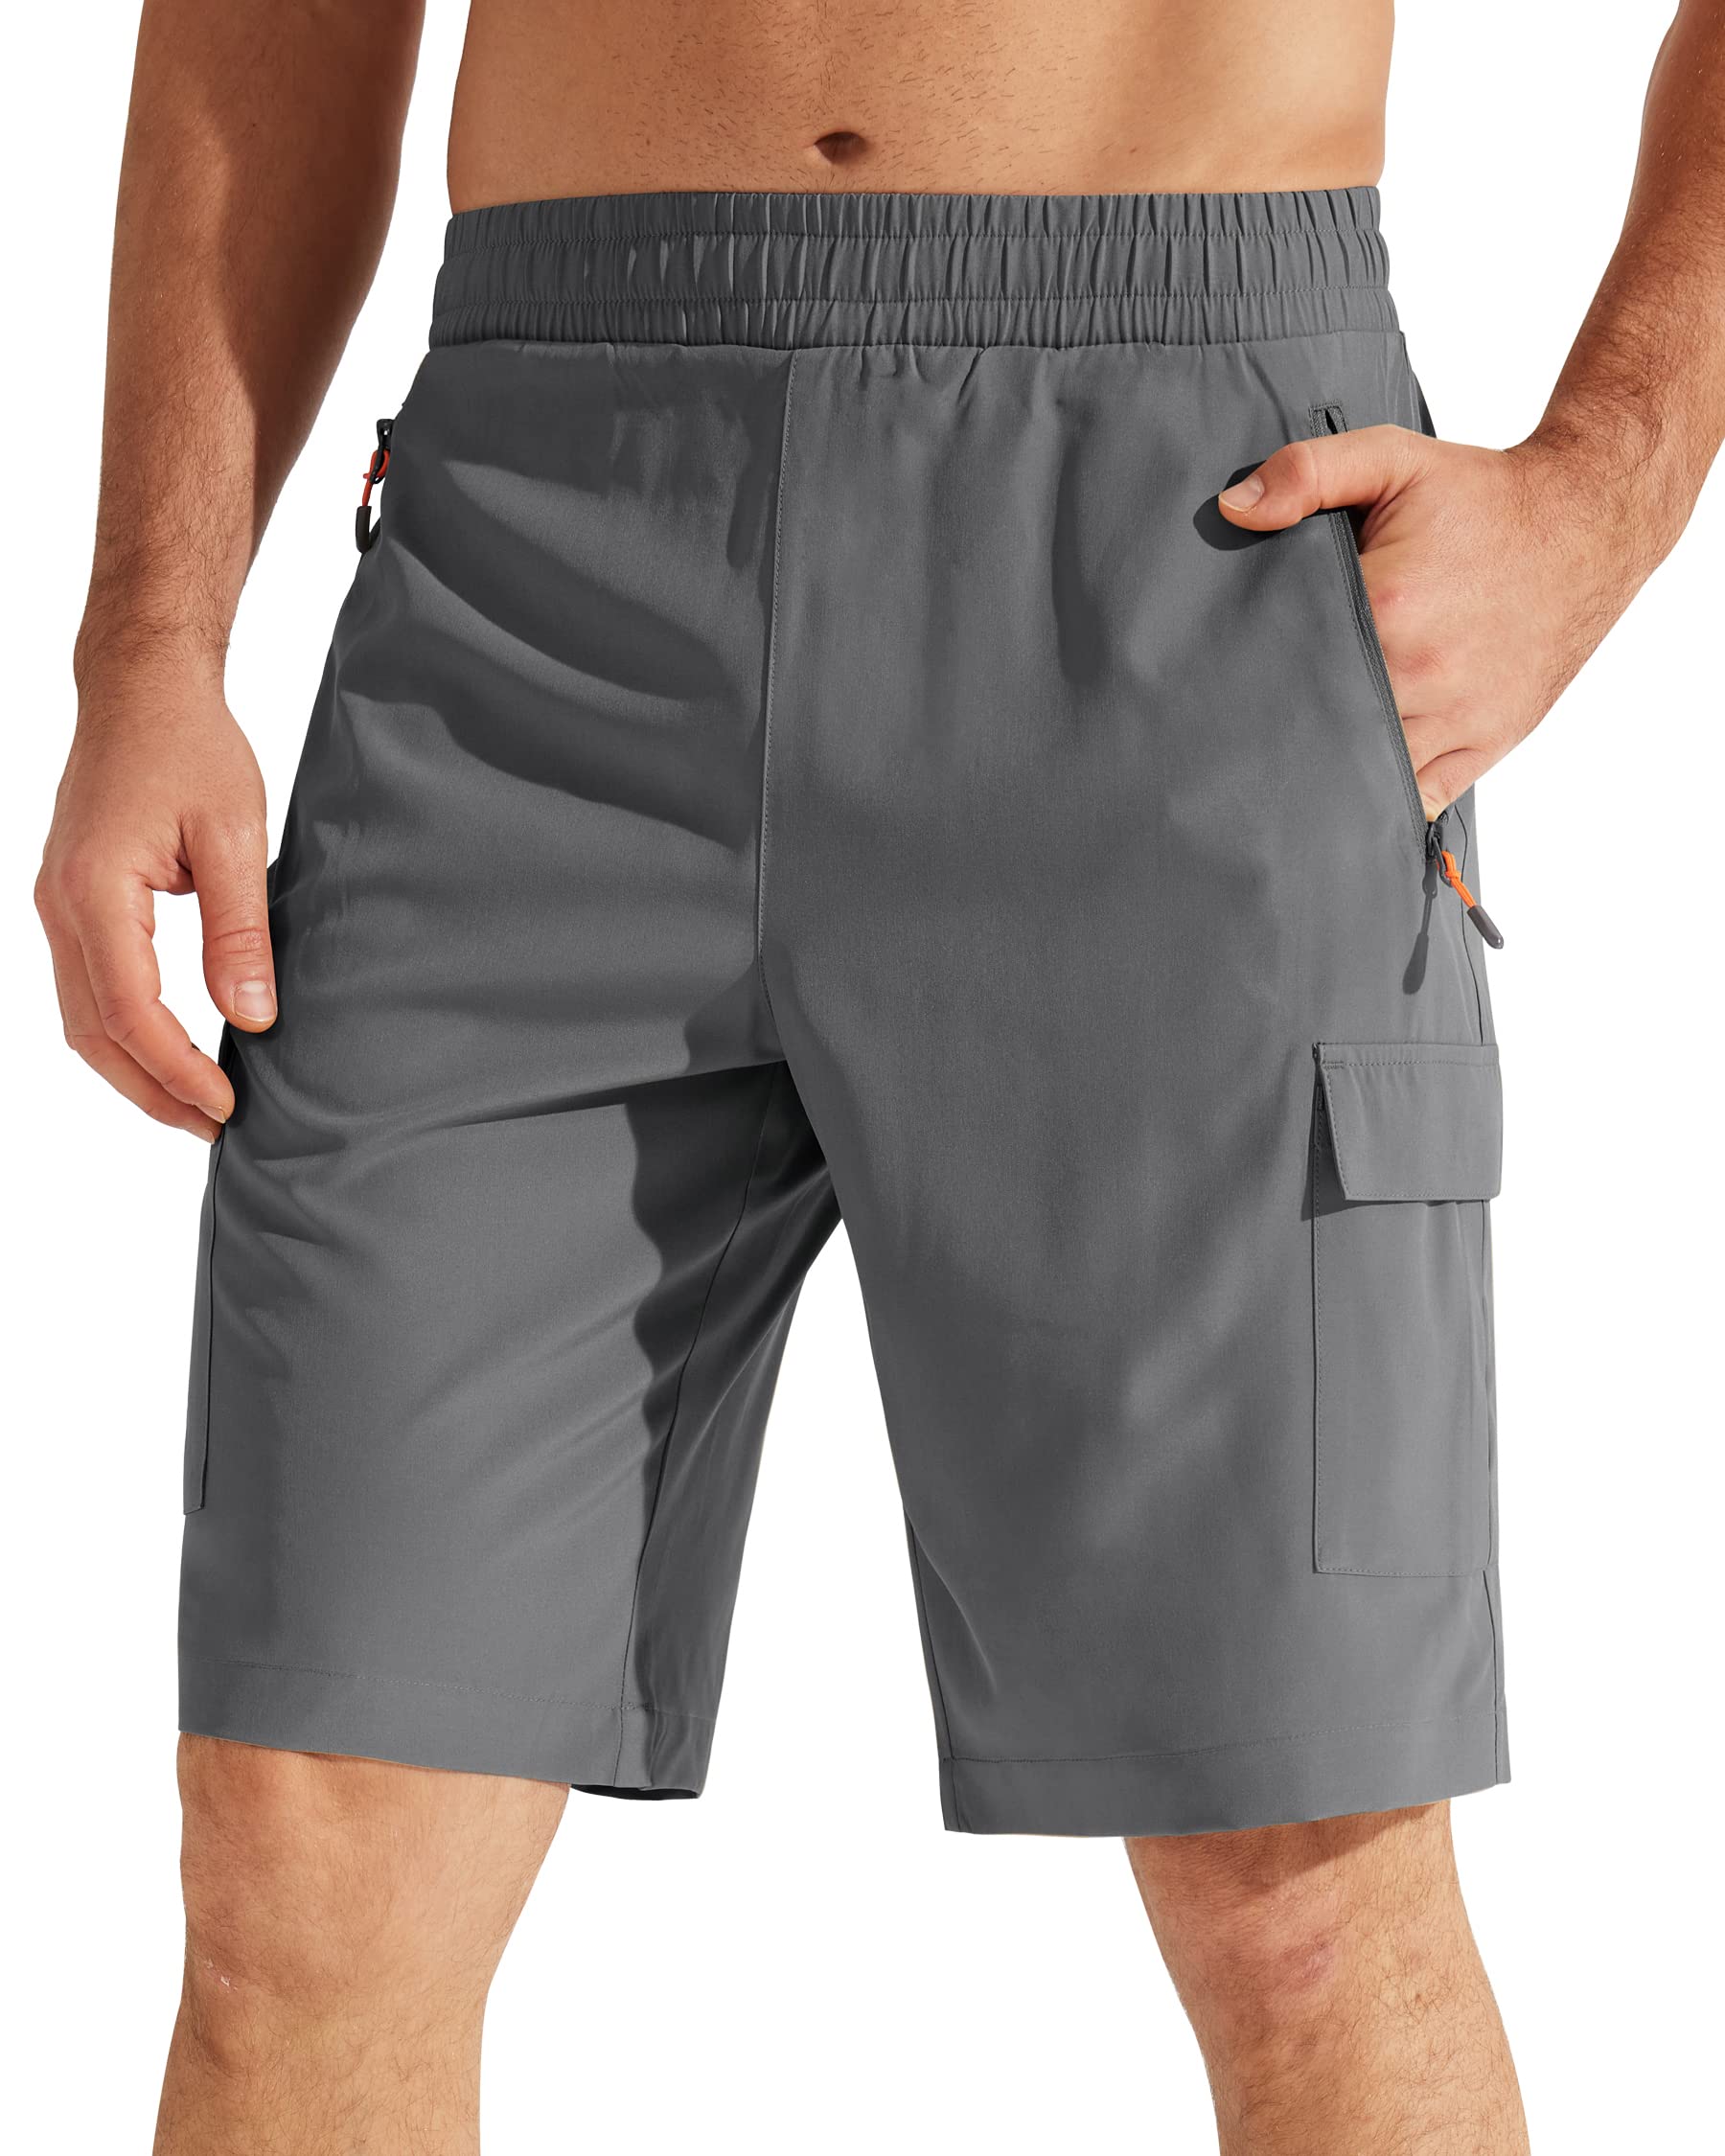 Mens Hiking Cargo Shorts Men's Athletic Shorts Quick Dry Outdoor